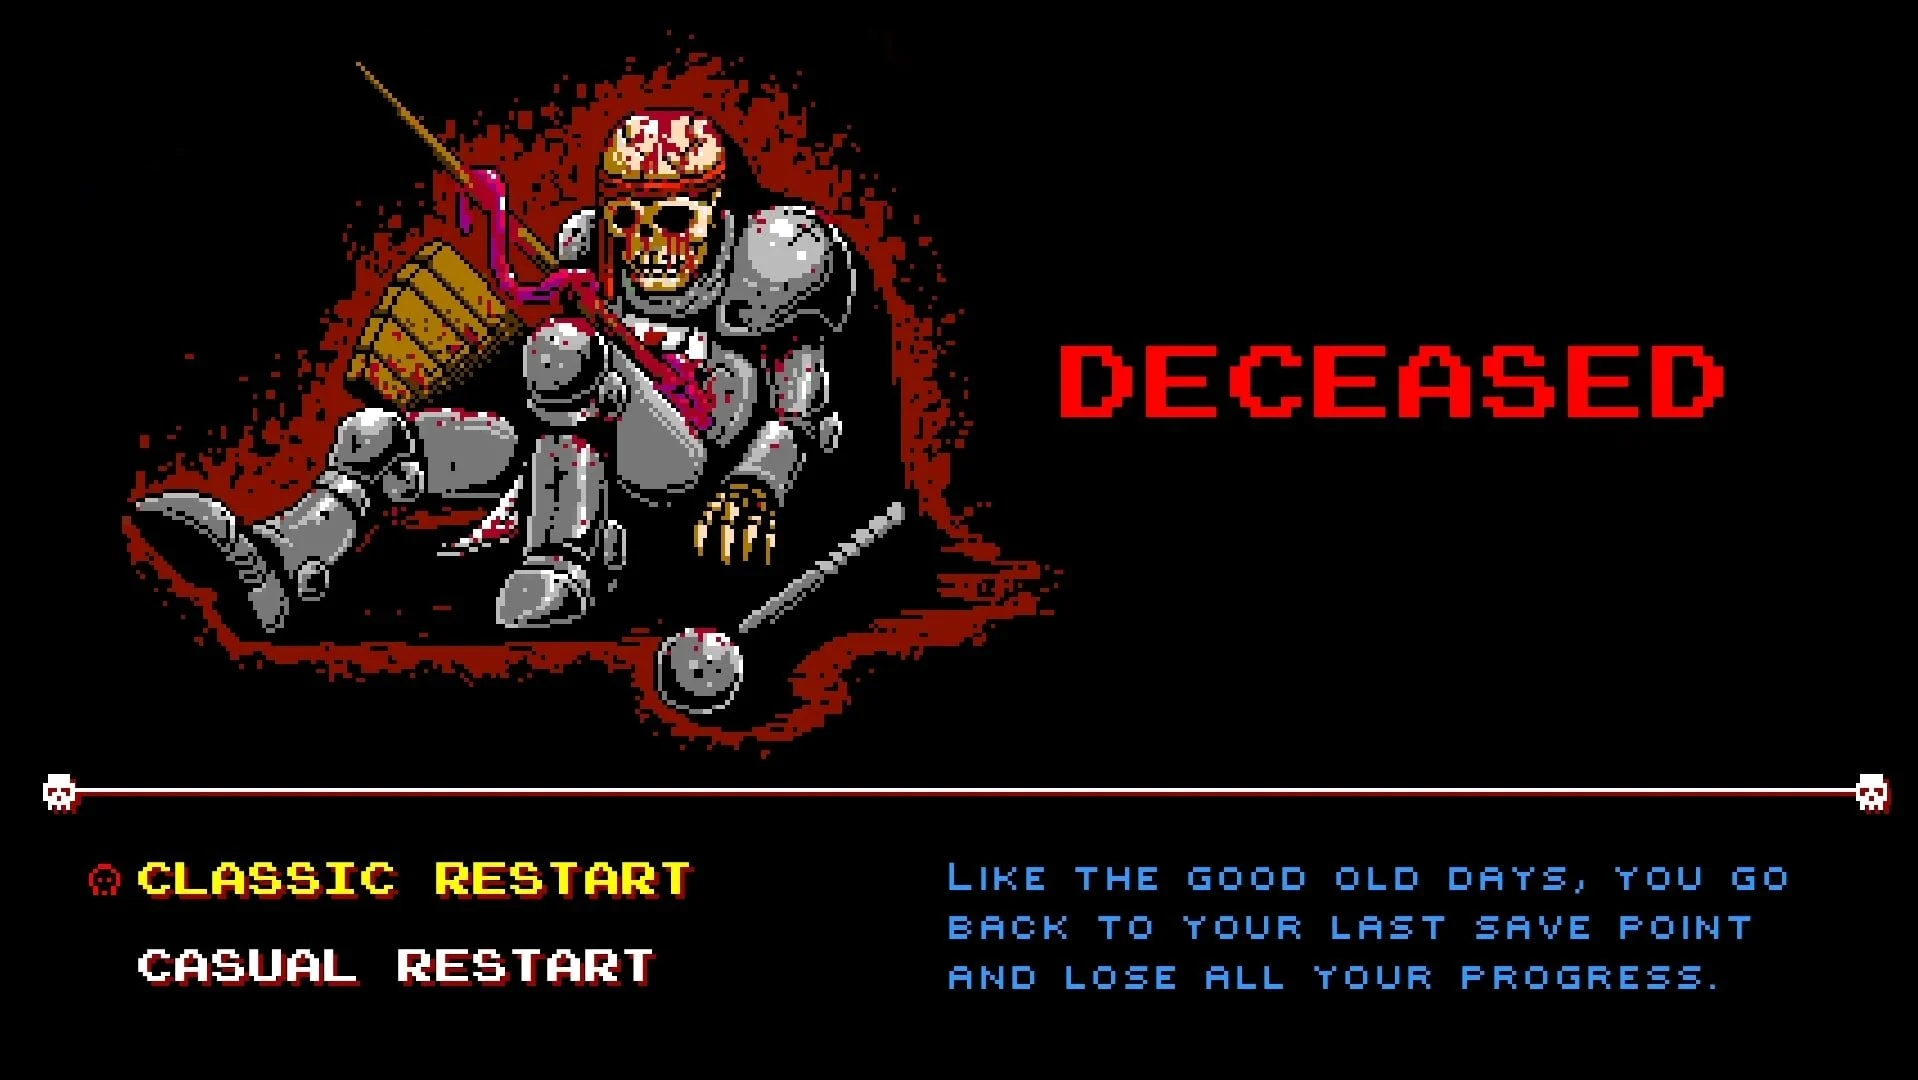 The Game Over screen, depicting a dead player rather viscerally.